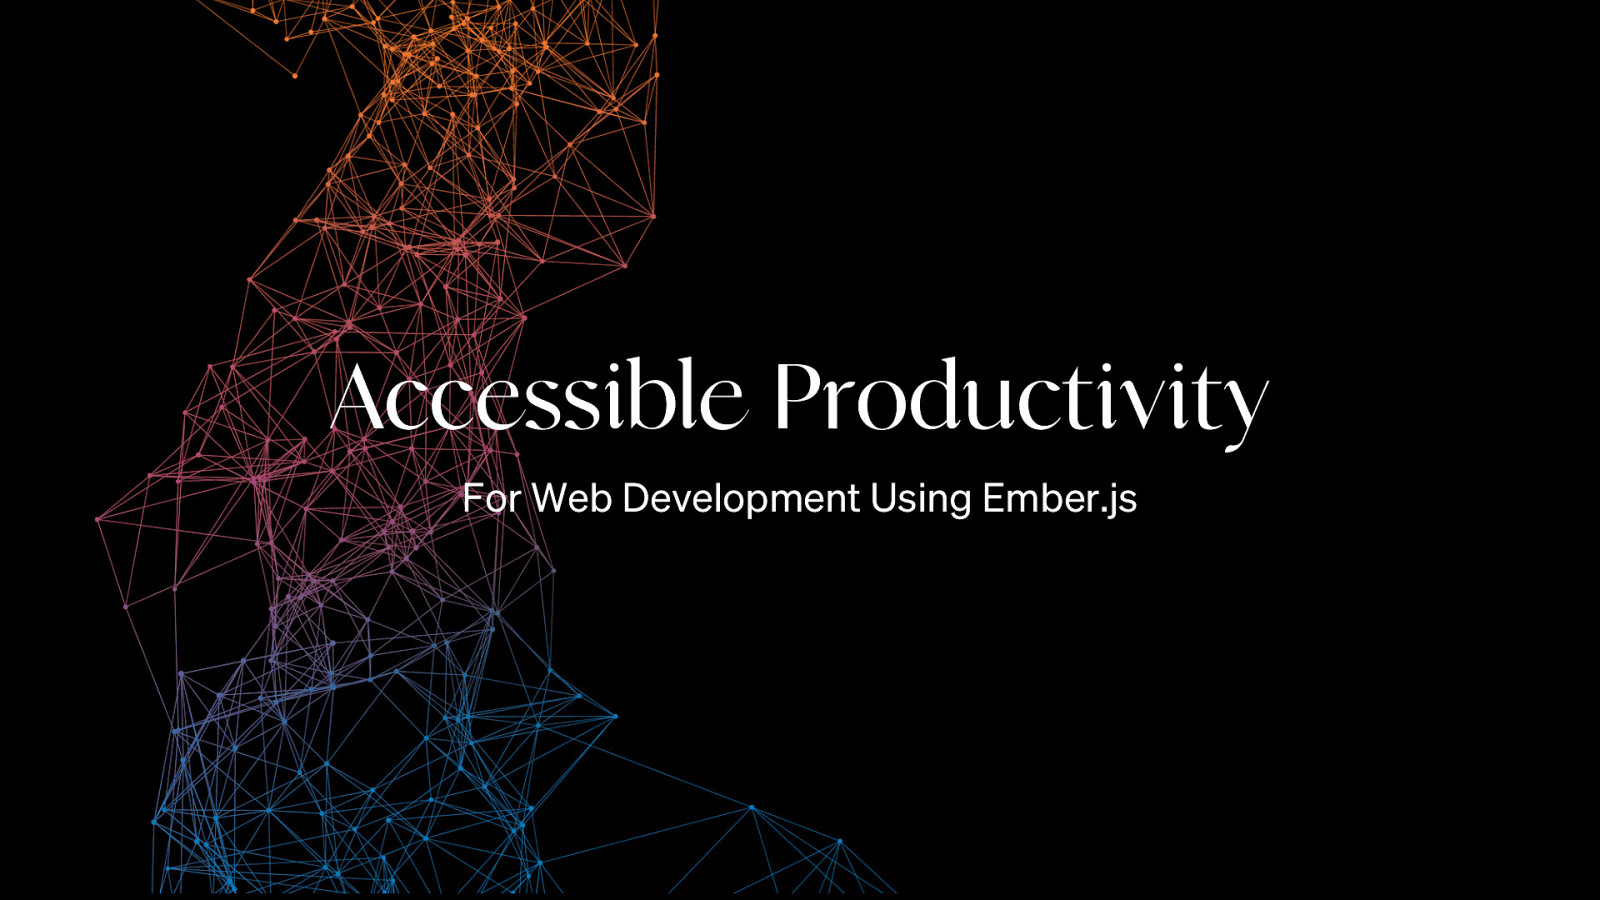 Accessible Productivity